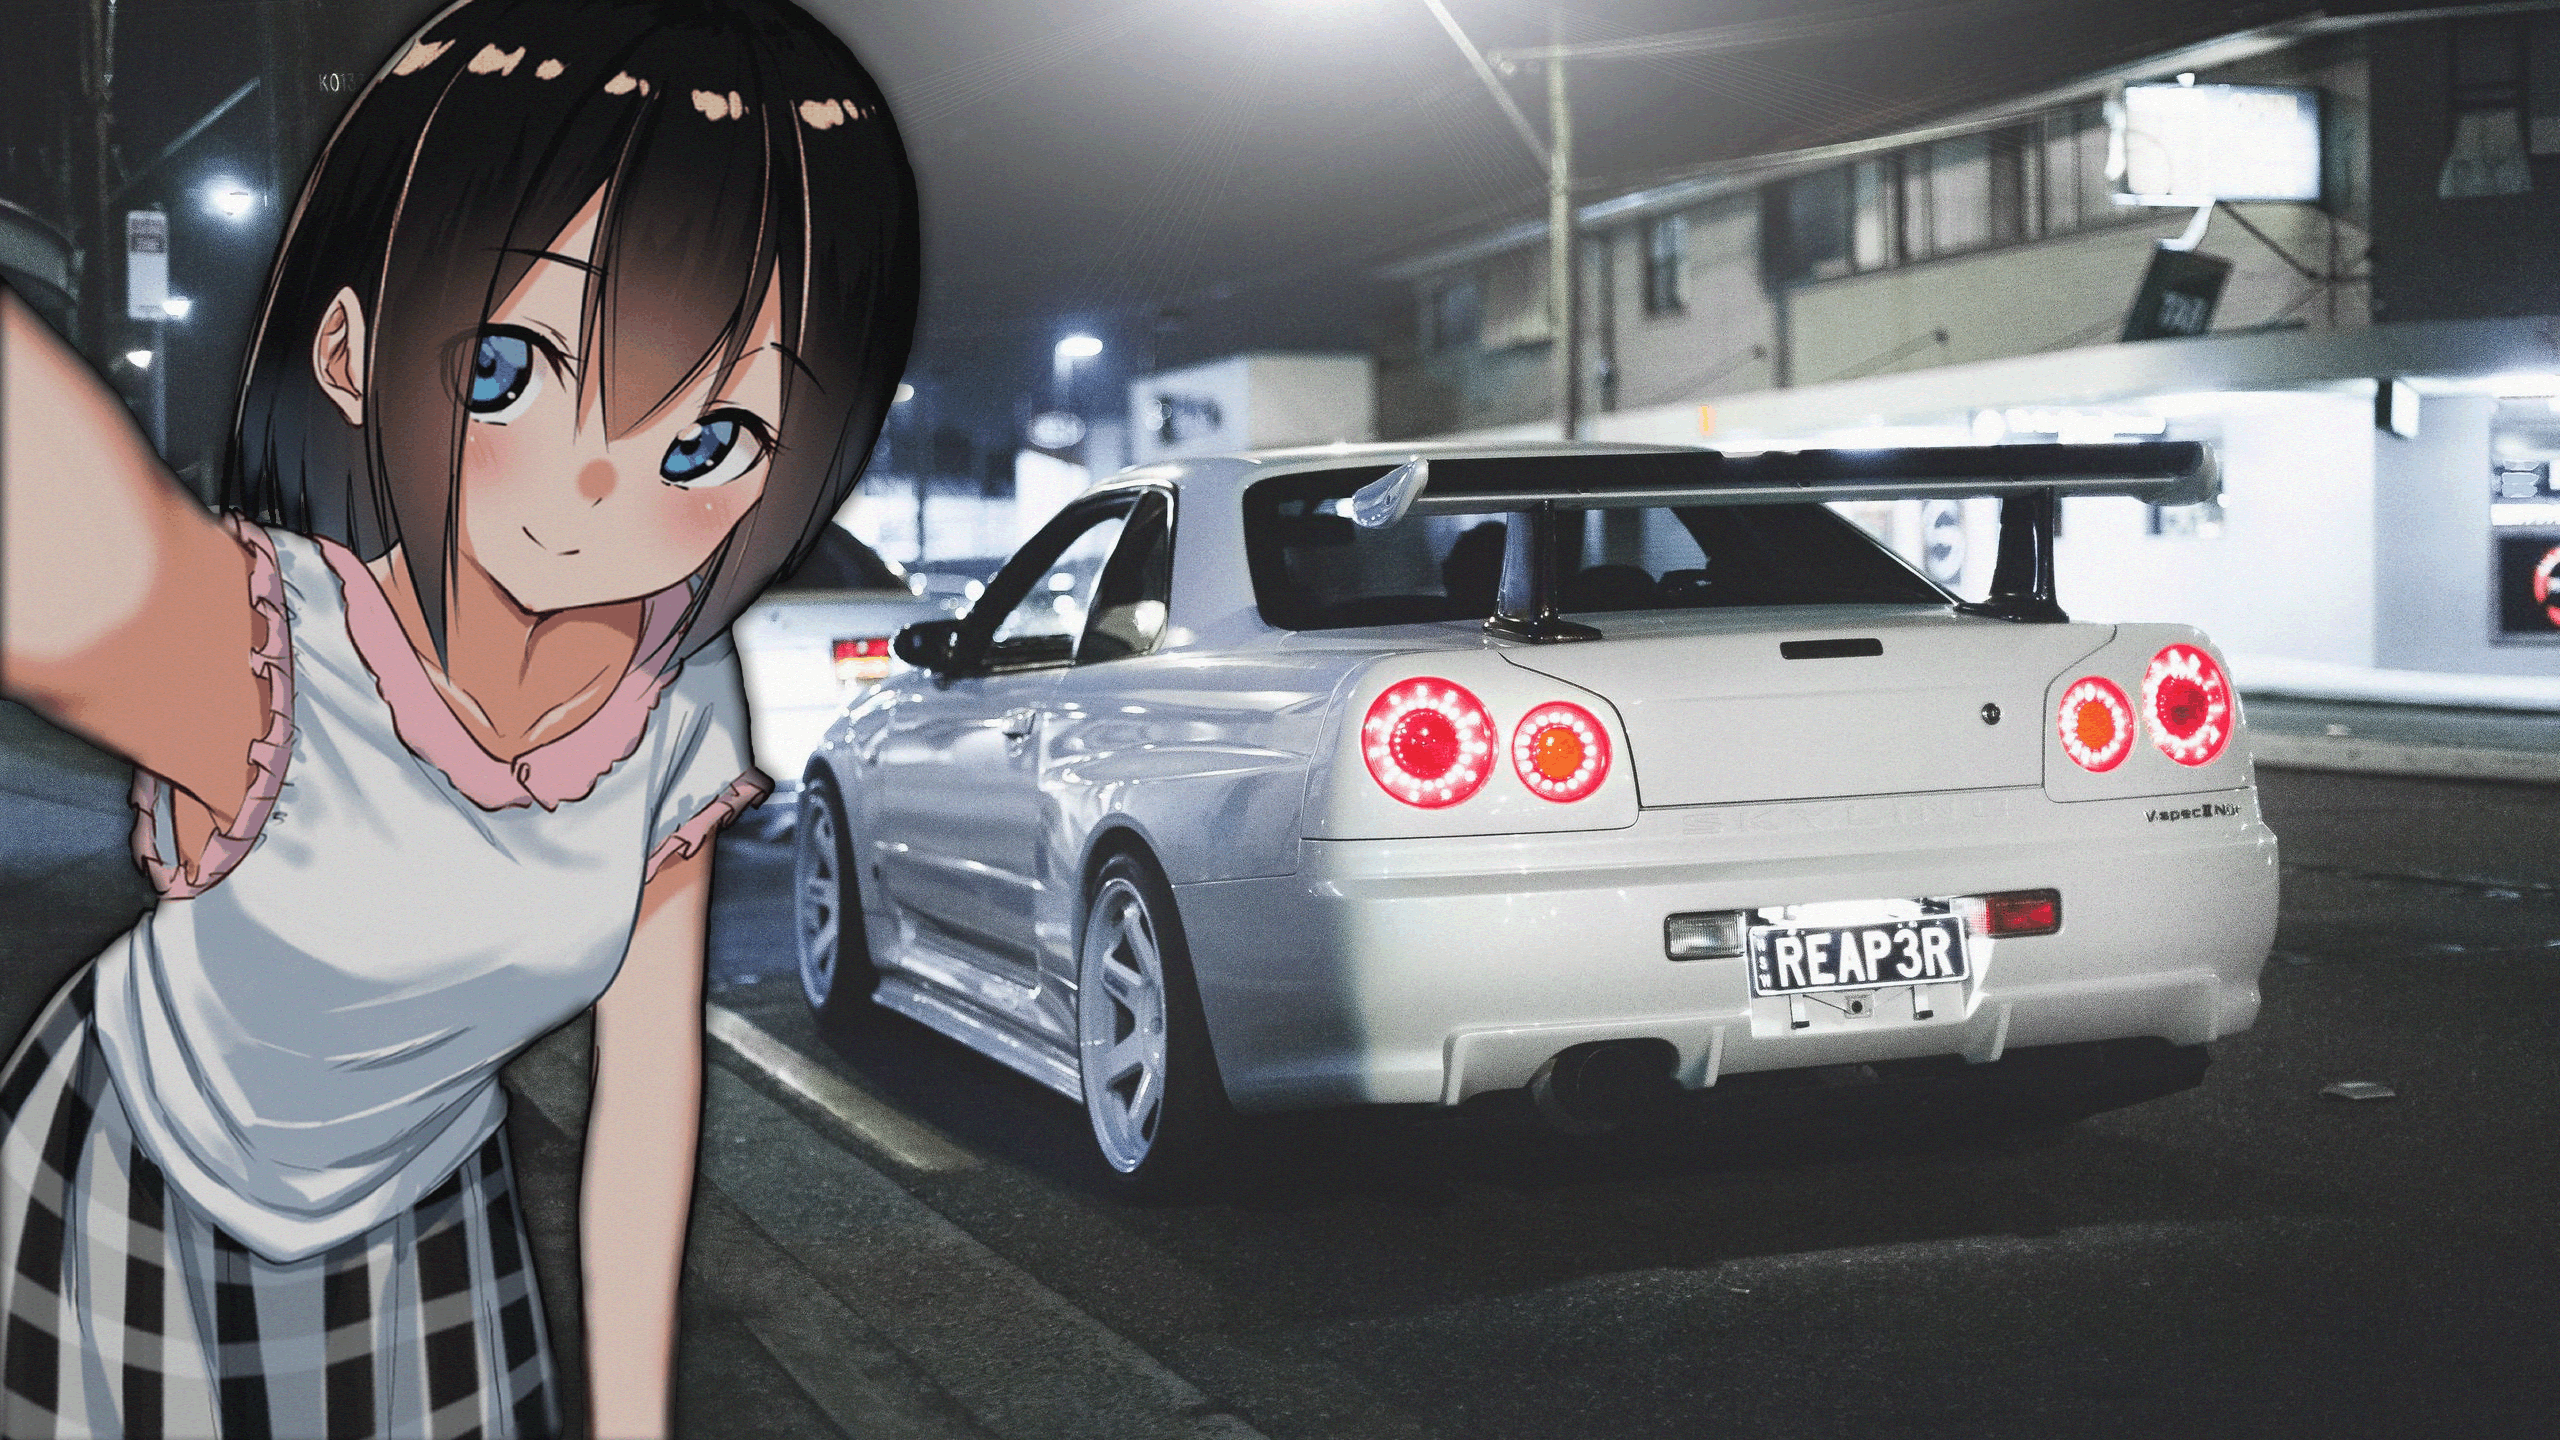 White Cars, Smiling, GTR R JDM, Anime Girls, Anime, Selfies, Brunette, Picture In Picture, Car, Blue Eyes, Vehicle HD Wallpaper